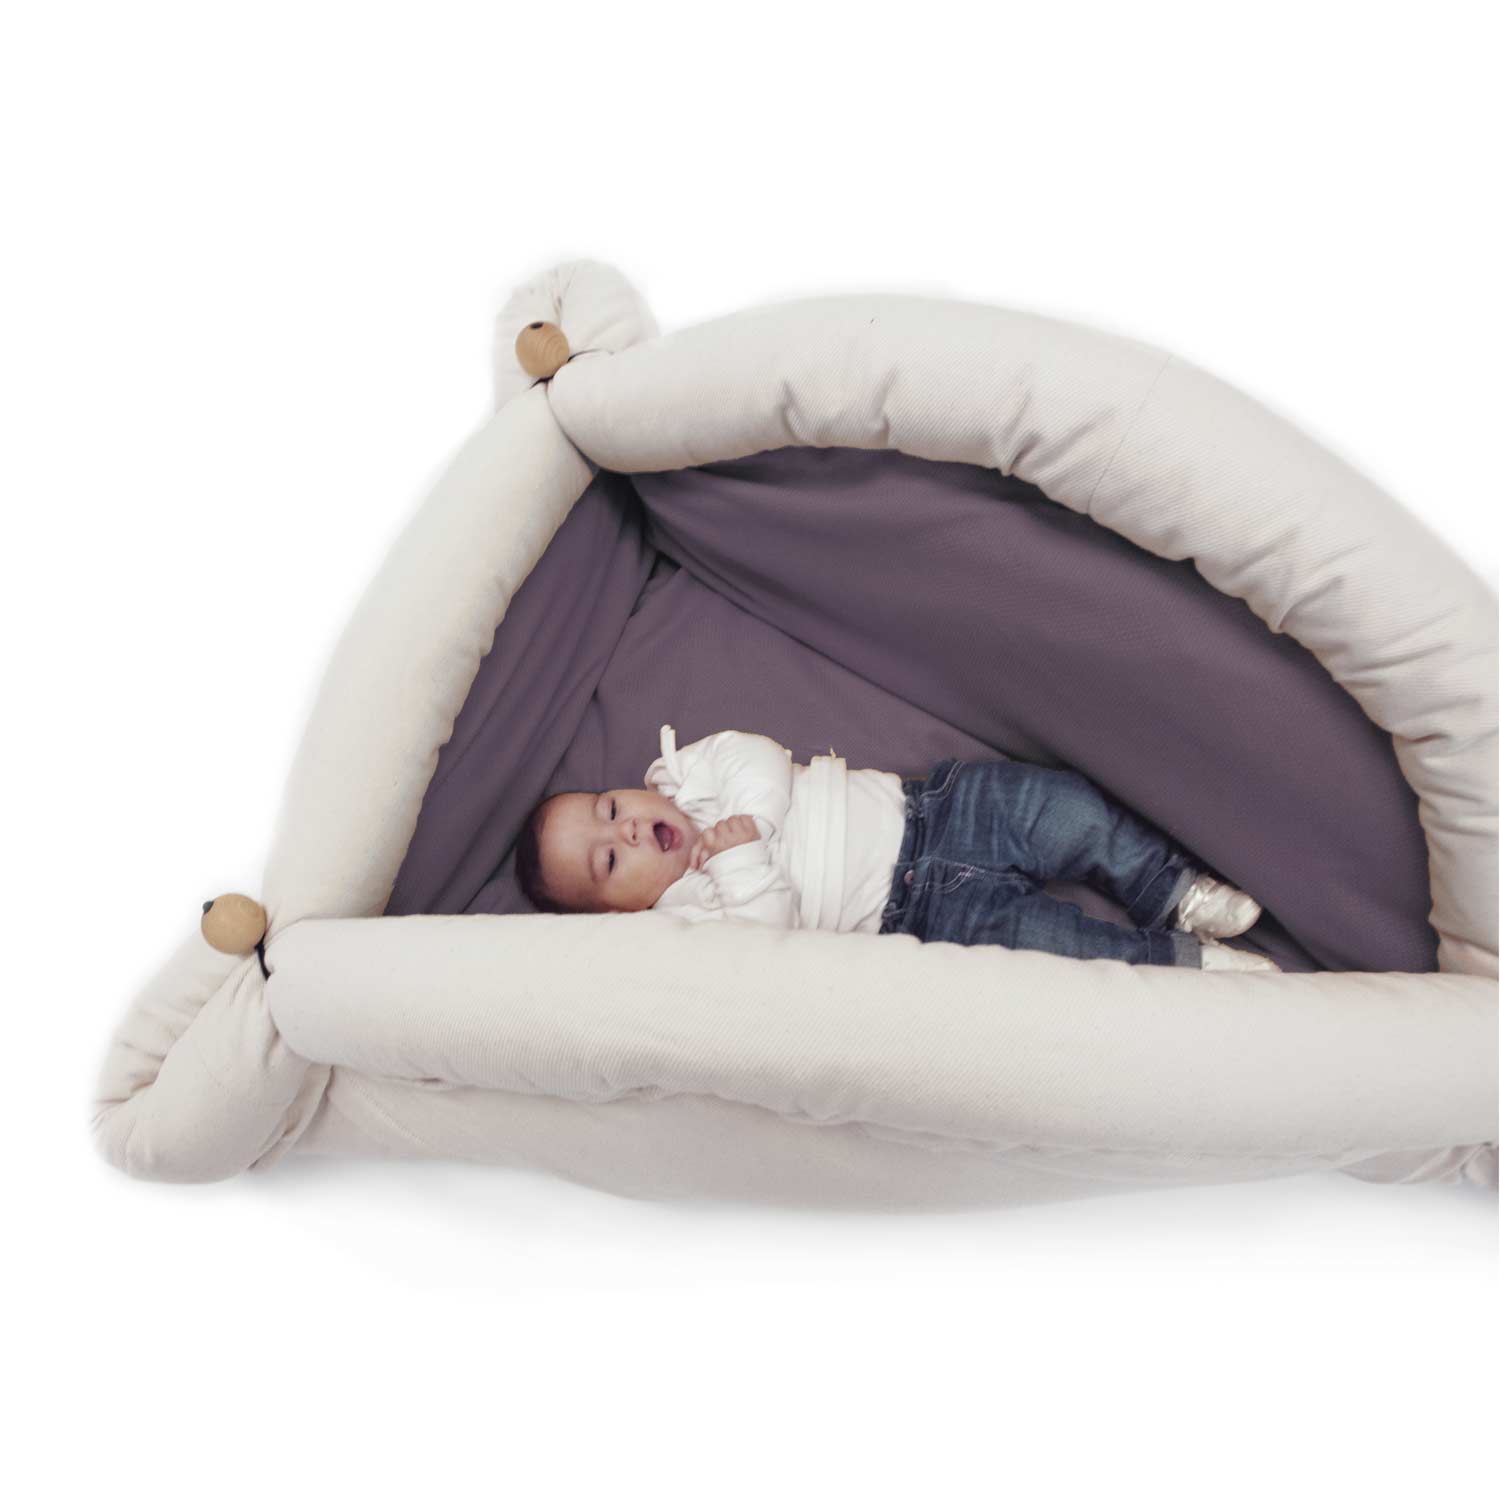 Blandito as a specially adapted baby bed.